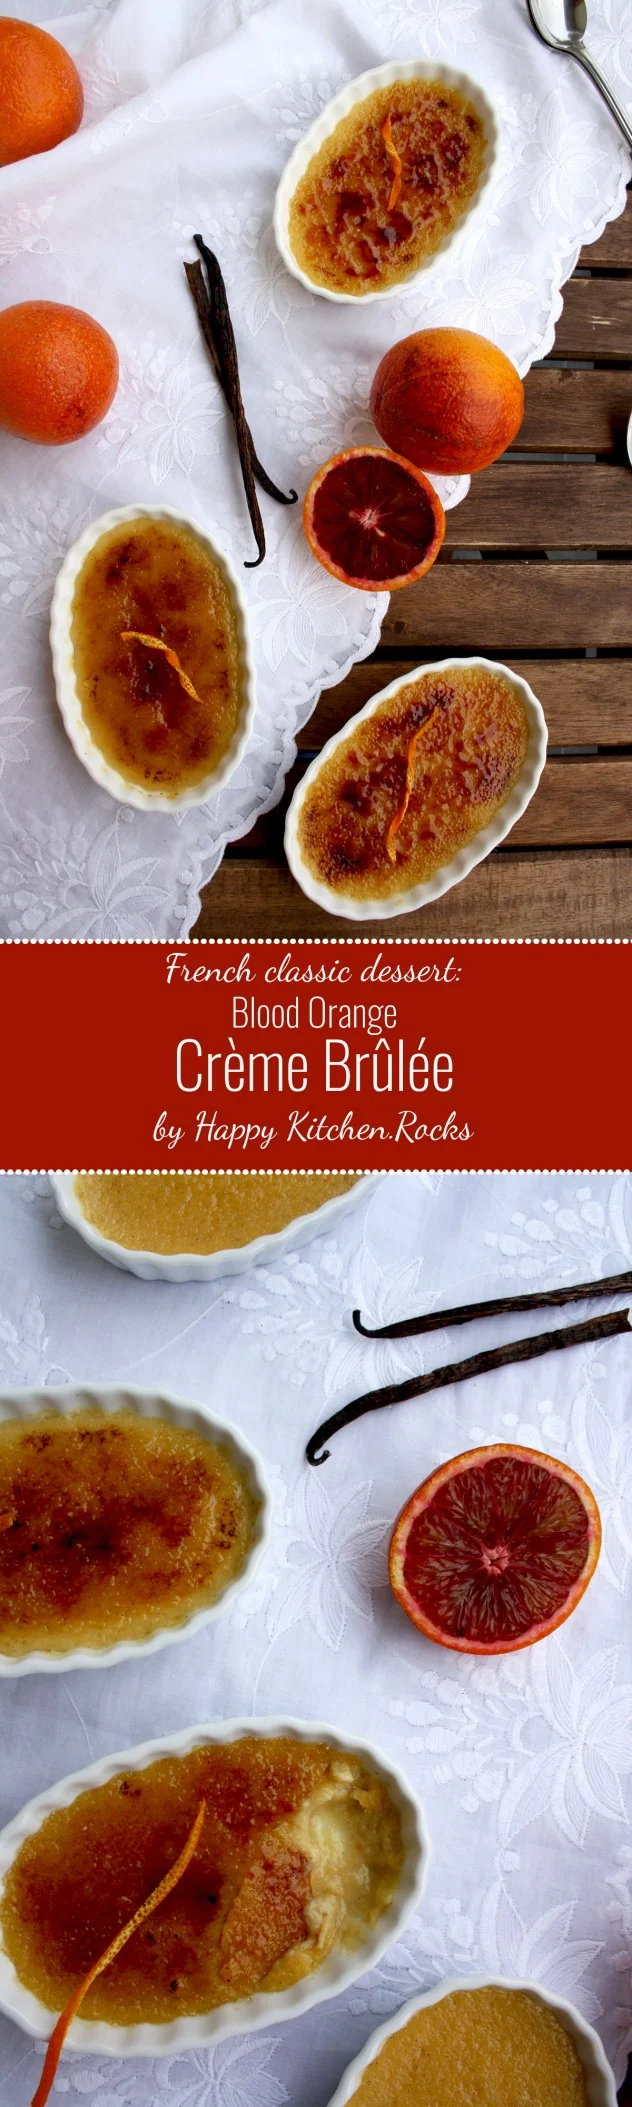 Blood Orange Crème Brûlée: Rich and creamy vanilla custard meets a brittle caramelized topping in this seductive and foolproof classic French dessert with a fresh hint of blood orange.